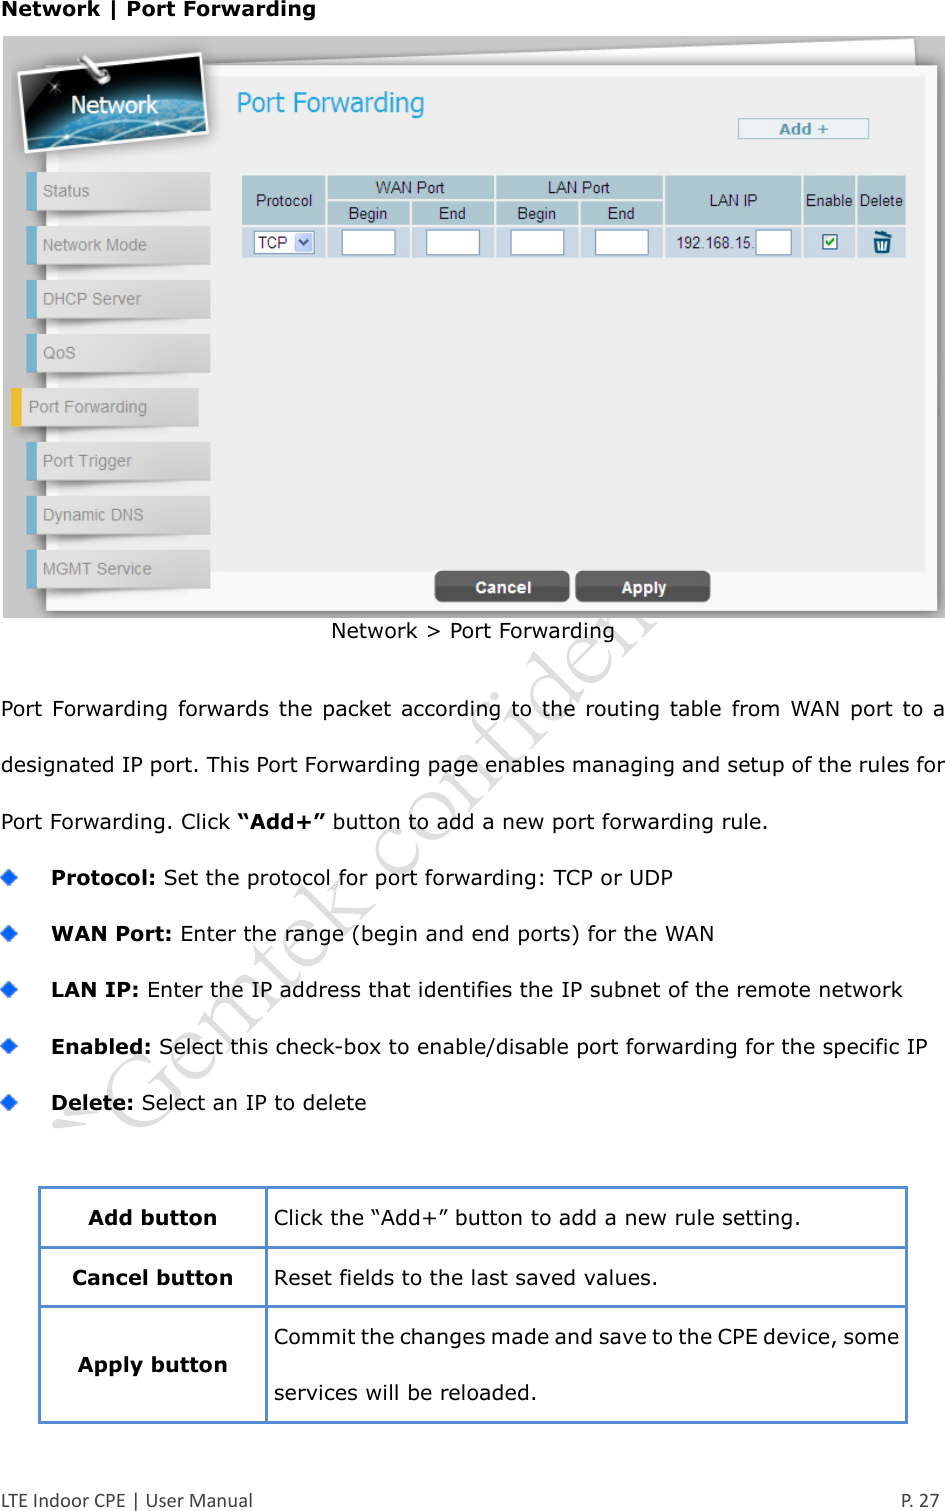  LTE Indoor CPE | User Manual      P. 27 Network | Port Forwarding  Network &gt; Port Forwarding  Port Forwarding  forwards  the  packet according  to the  routing table  from WAN  port  to a designated IP port. This Port Forwarding page enables managing and setup of the rules for Port Forwarding. Click “Add+” button to add a new port forwarding rule.  Protocol: Set the protocol for port forwarding: TCP or UDP  WAN Port: Enter the range (begin and end ports) for the WAN  LAN IP: Enter the IP address that identifies the IP subnet of the remote network  Enabled: Select this check-box to enable/disable port forwarding for the specific IP  Delete: Select an IP to delete  Add button Click the “Add+” button to add a new rule setting. Cancel button Reset fields to the last saved values. Apply button Commit the changes made and save to the CPE device, some services will be reloaded. 